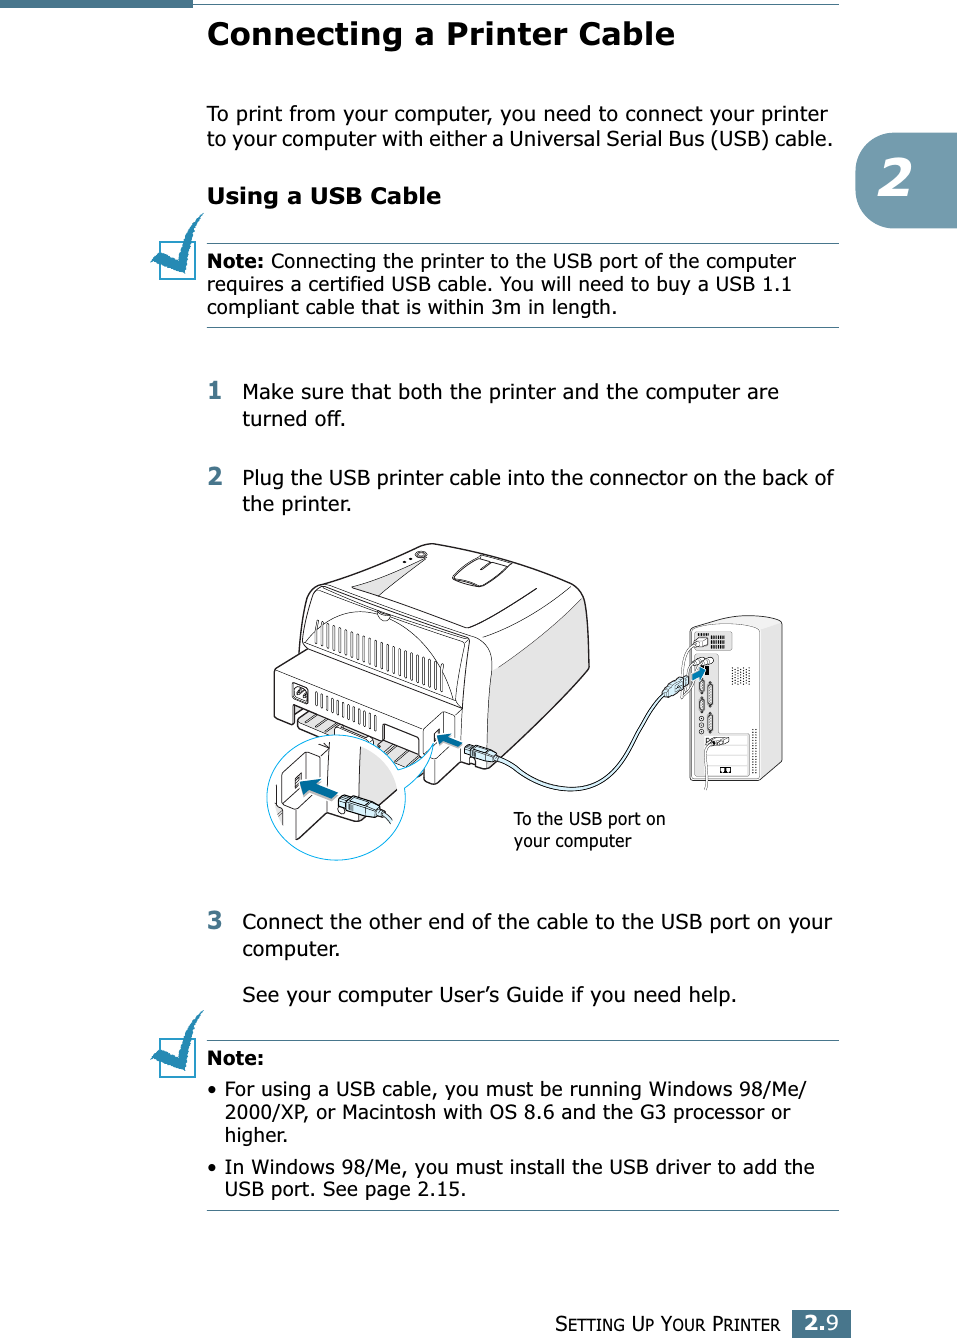 SETTING UP YOUR PRINTER2.92Connecting a Printer CableTo print from your computer, you need to connect your printer to your computer with either a Universal Serial Bus (USB) cable. Using a USB CableNote: Connecting the printer to the USB port of the computer requires a certified USB cable. You will need to buy a USB 1.1 compliant cable that is within 3m in length. 1Make sure that both the printer and the computer are turned off.2Plug the USB printer cable into the connector on the back of the printer.3Connect the other end of the cable to the USB port on your computer. See your computer User’s Guide if you need help. Note: • For using a USB cable, you must be running Windows 98/Me/2000/XP, or Macintosh with OS 8.6 and the G3 processor or higher. • In Windows 98/Me, you must install the USB driver to add the USB port. See page 2.15.To the USB port on your computer